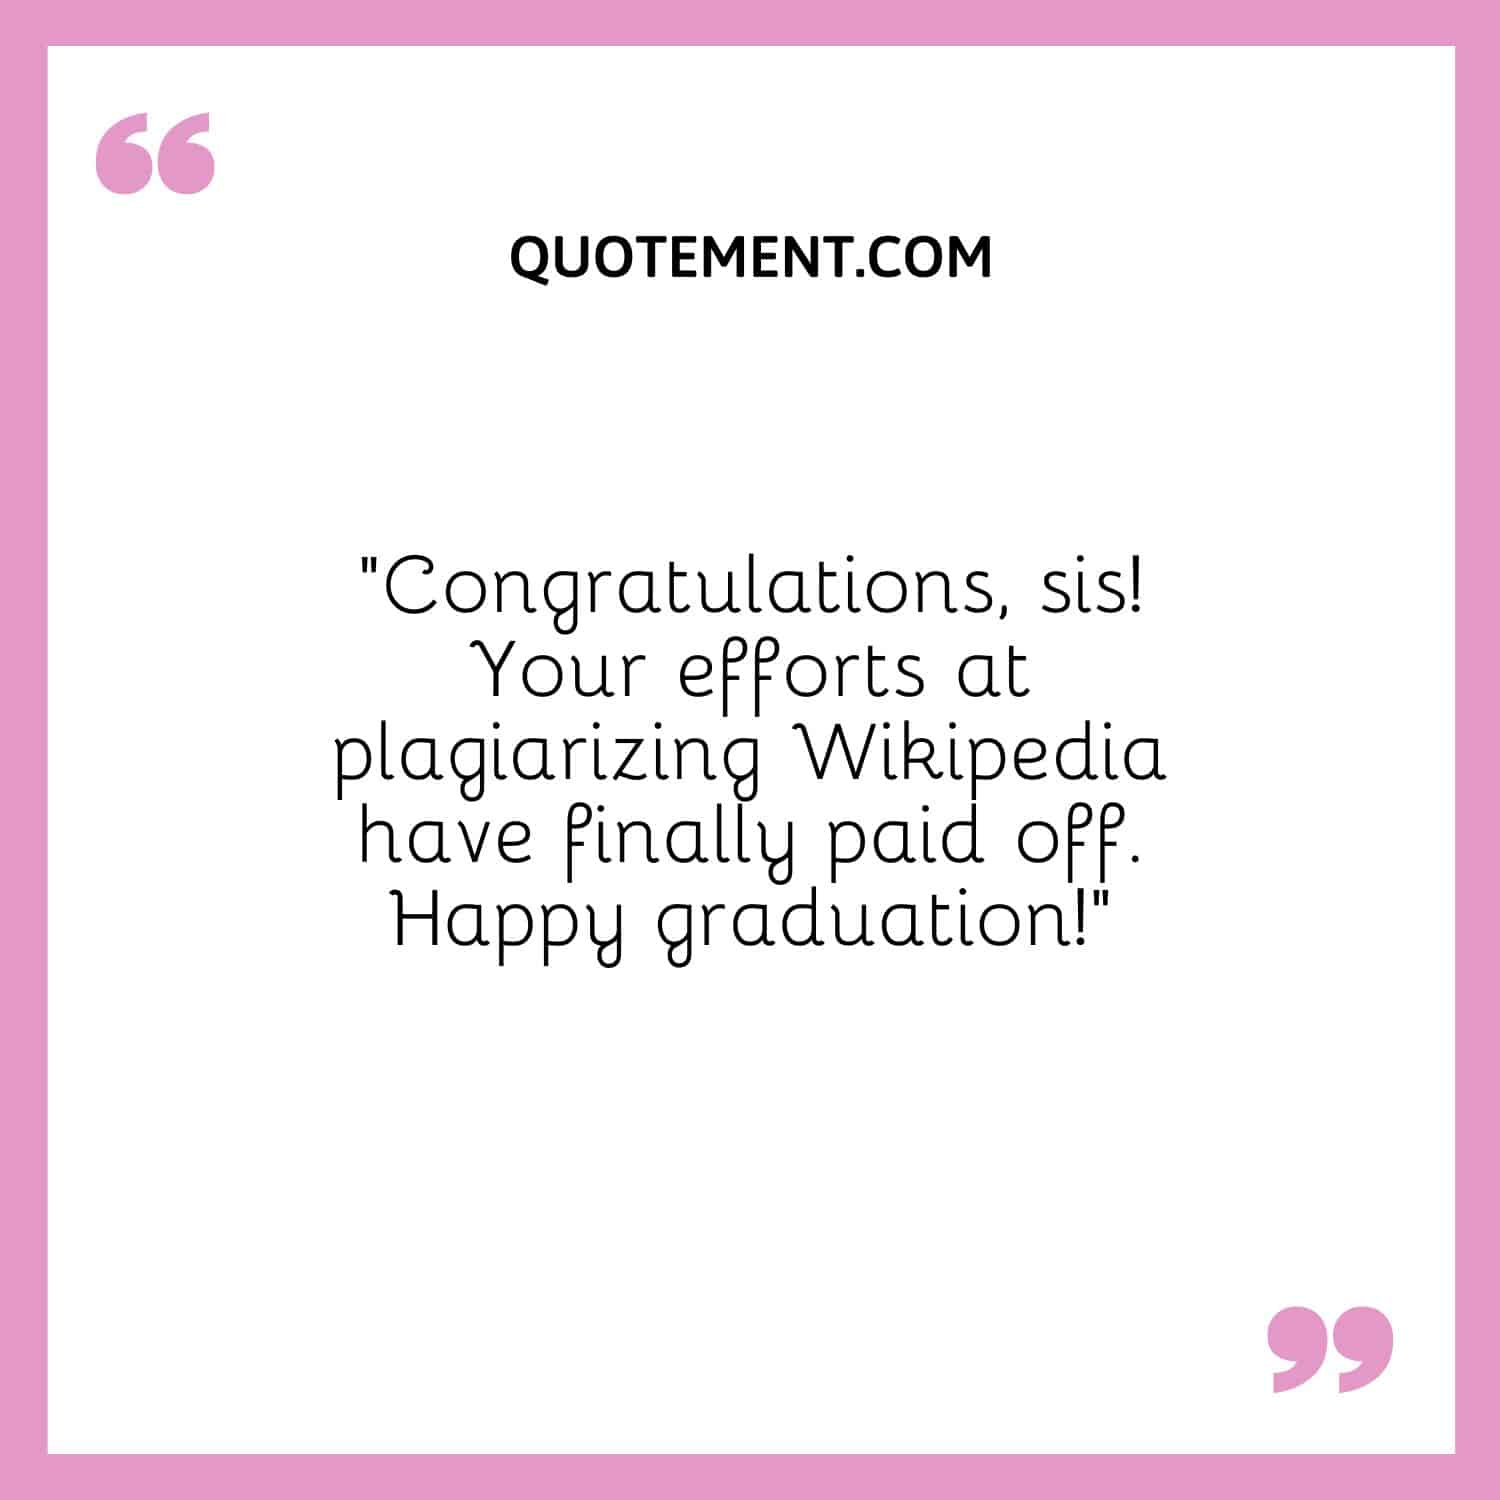 “Congratulations, sis! Your efforts at plagiarizing Wikipedia have finally paid off. Happy graduation!”